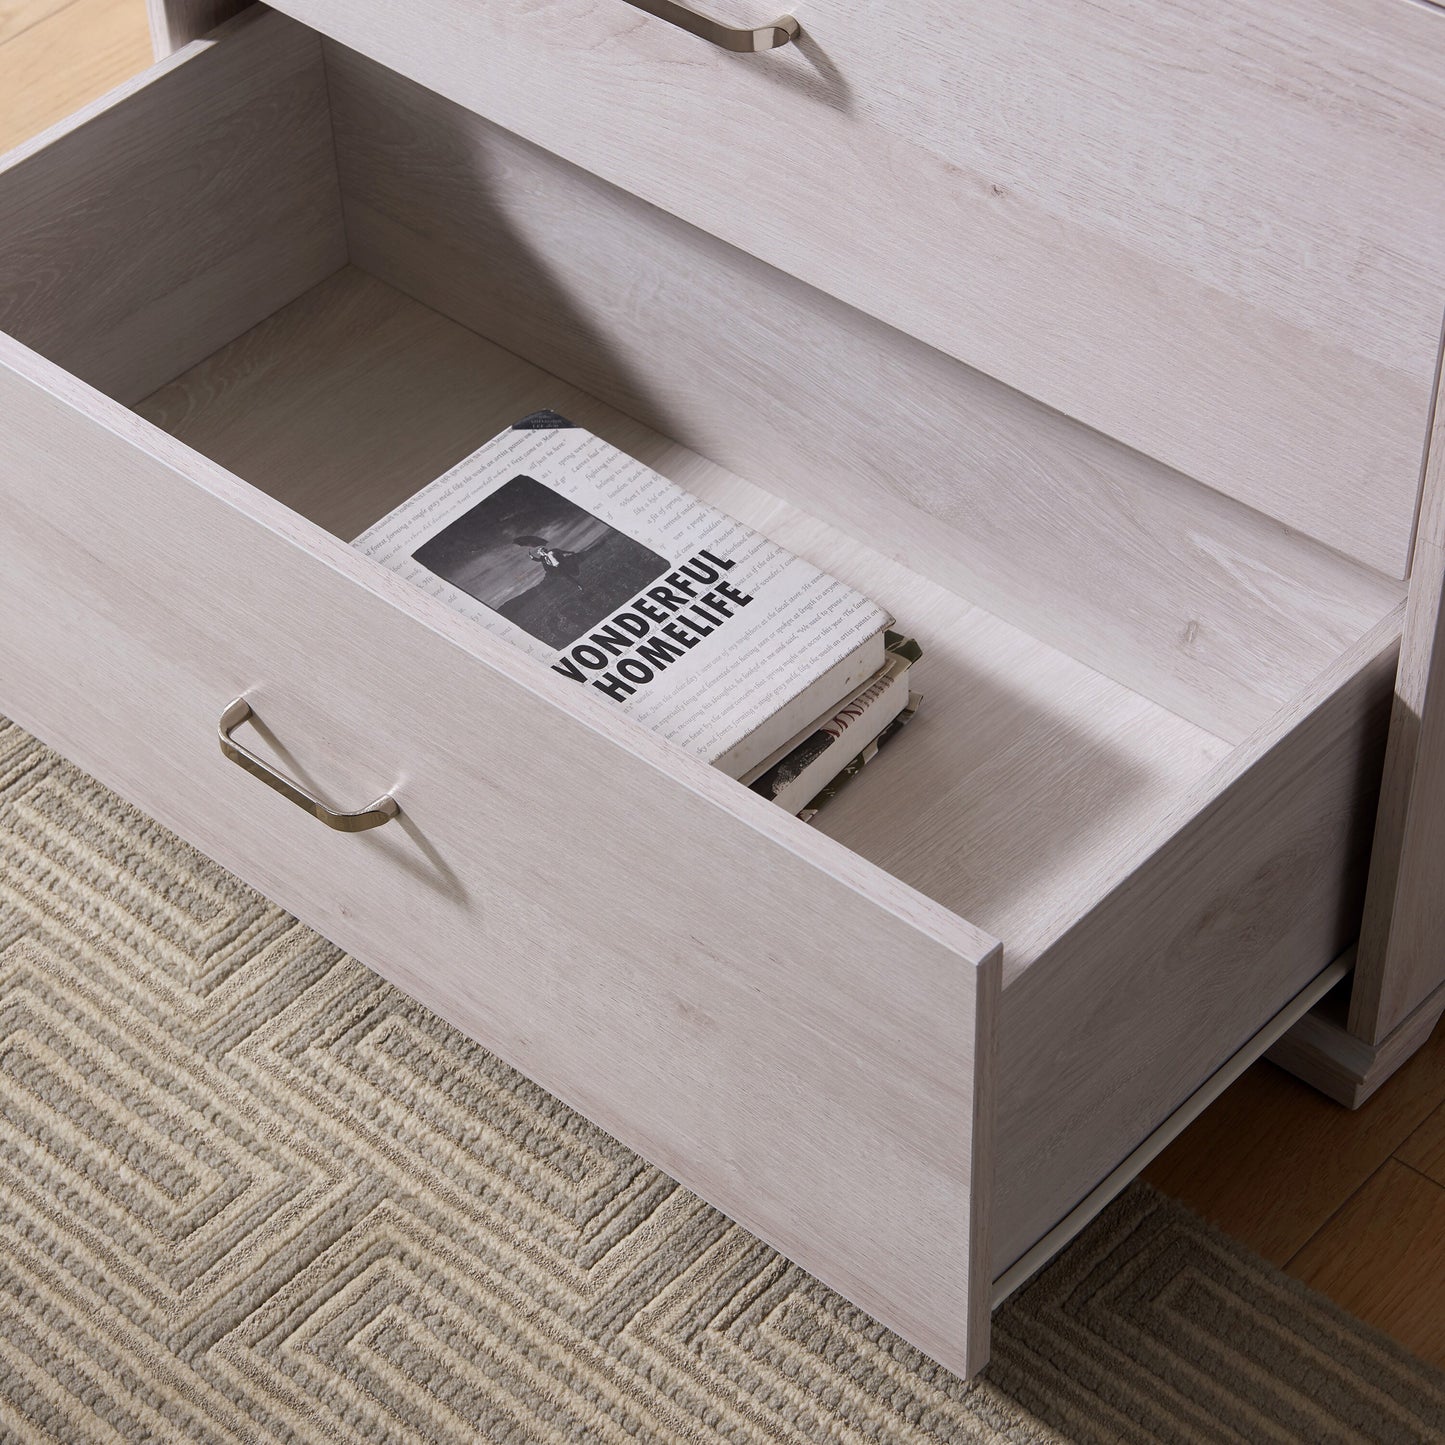 Left angled close-up view of a contemporary white oak four-drawer chest dresser with bottom drawer open with a rug and accessories